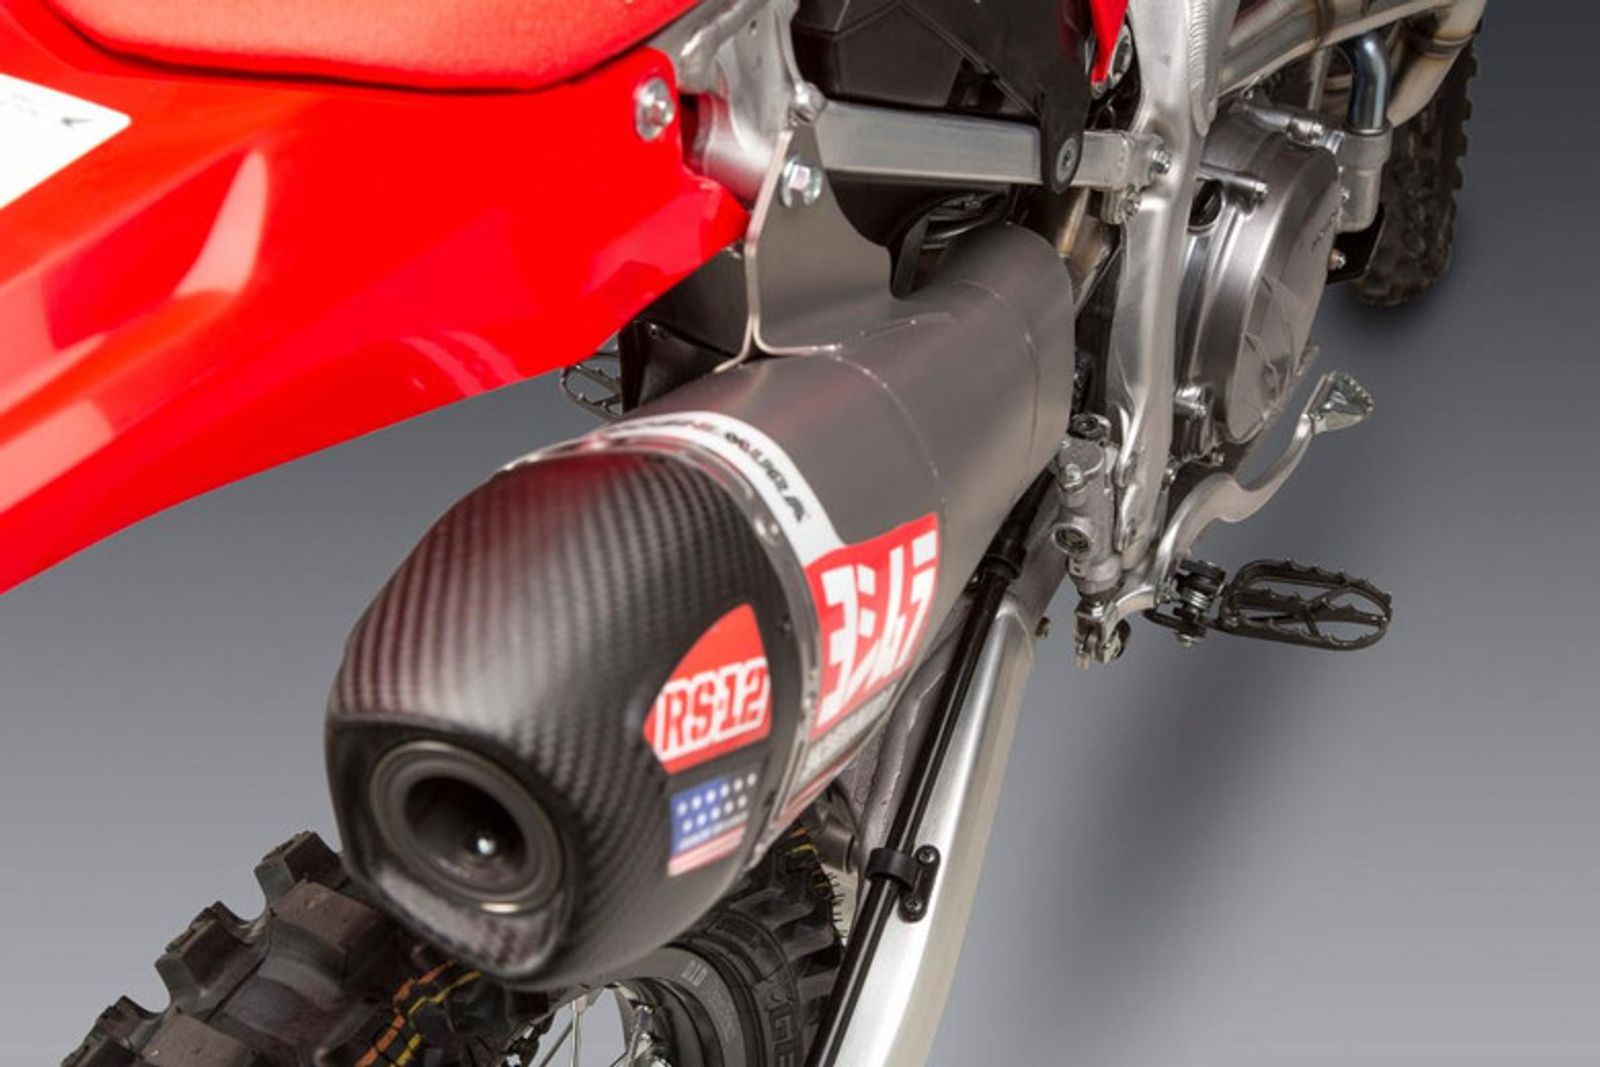 Yoshimura RS-12 Stainless Full Exhaust System